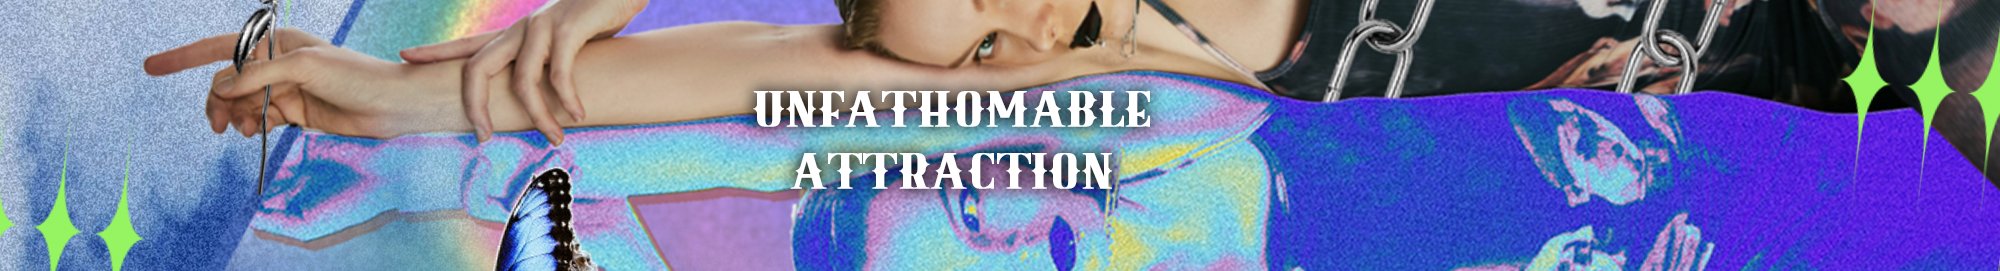 Unfathomable Attraction